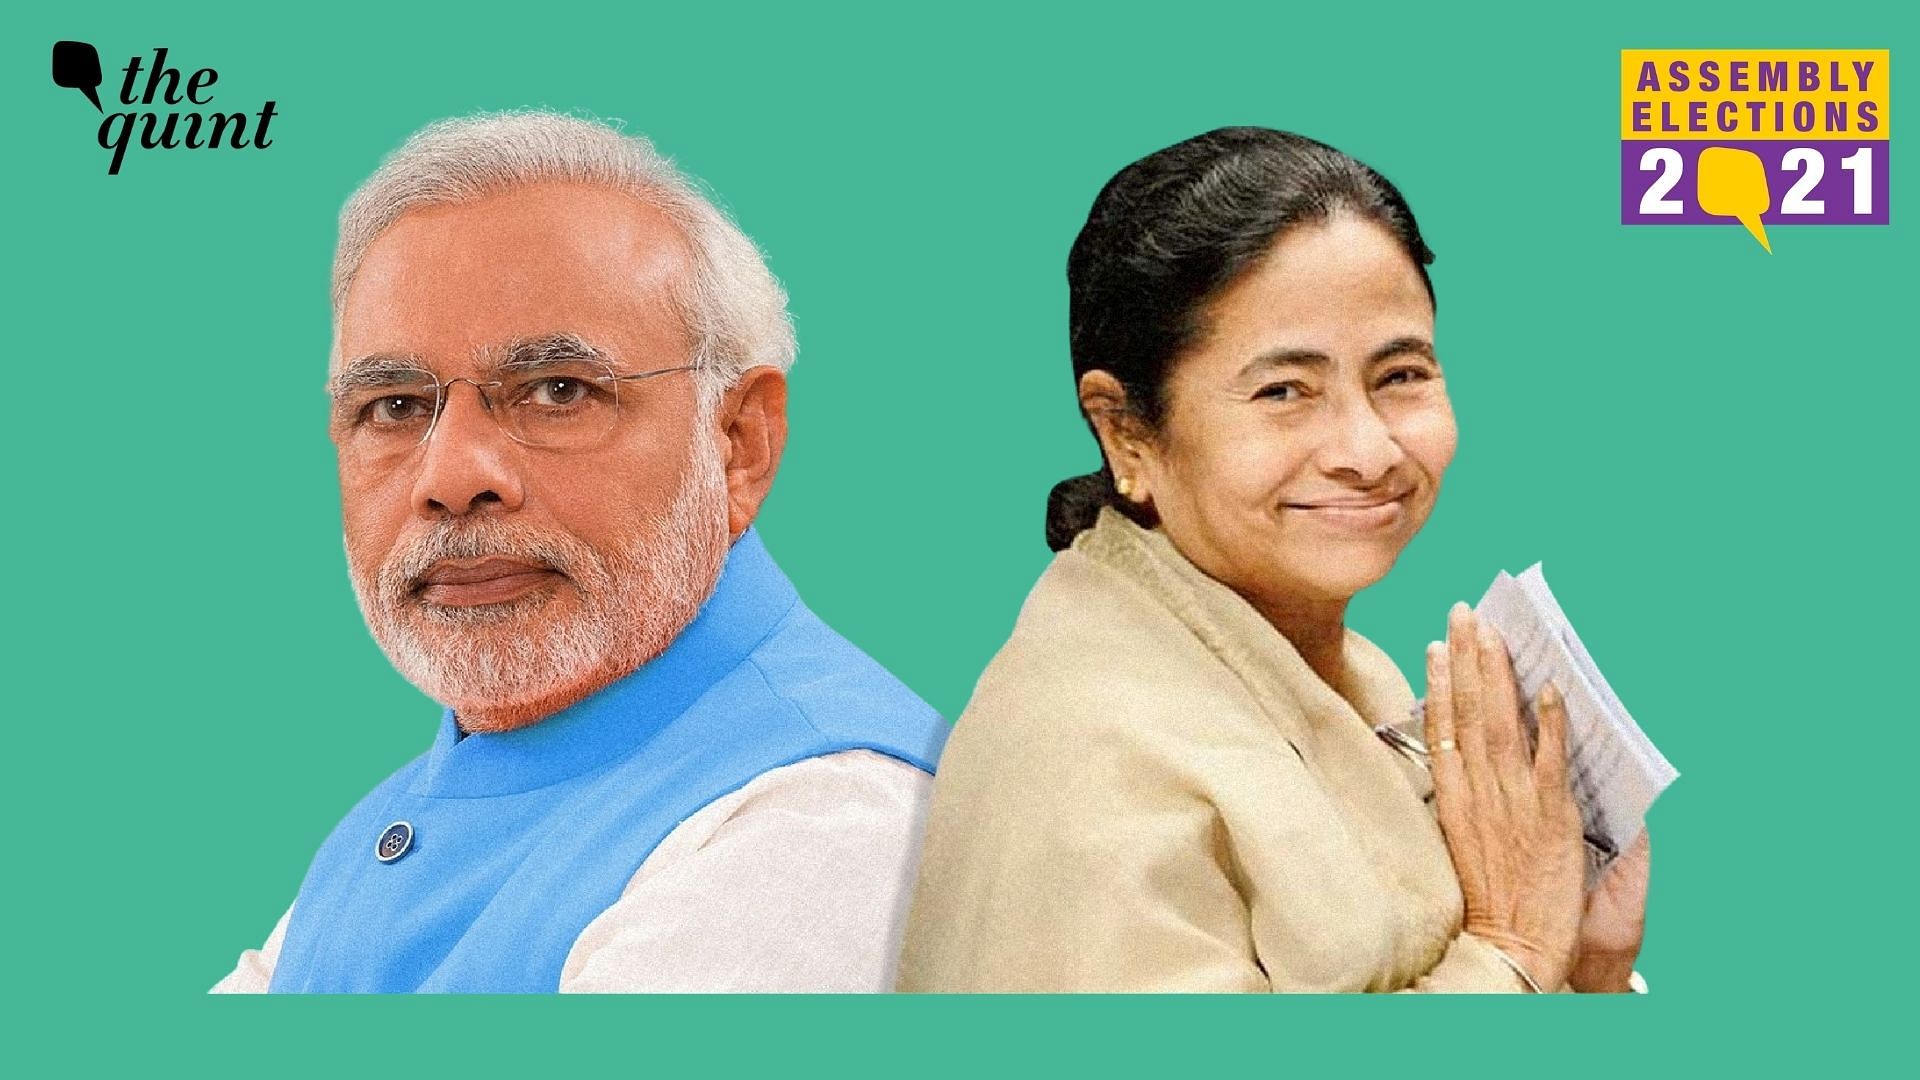 Prime Minister Narendra Modi and West Bengal CM Mamata Banerjee have been at loggerheads over the upcoming Assembly elections in the state for quite some time now.